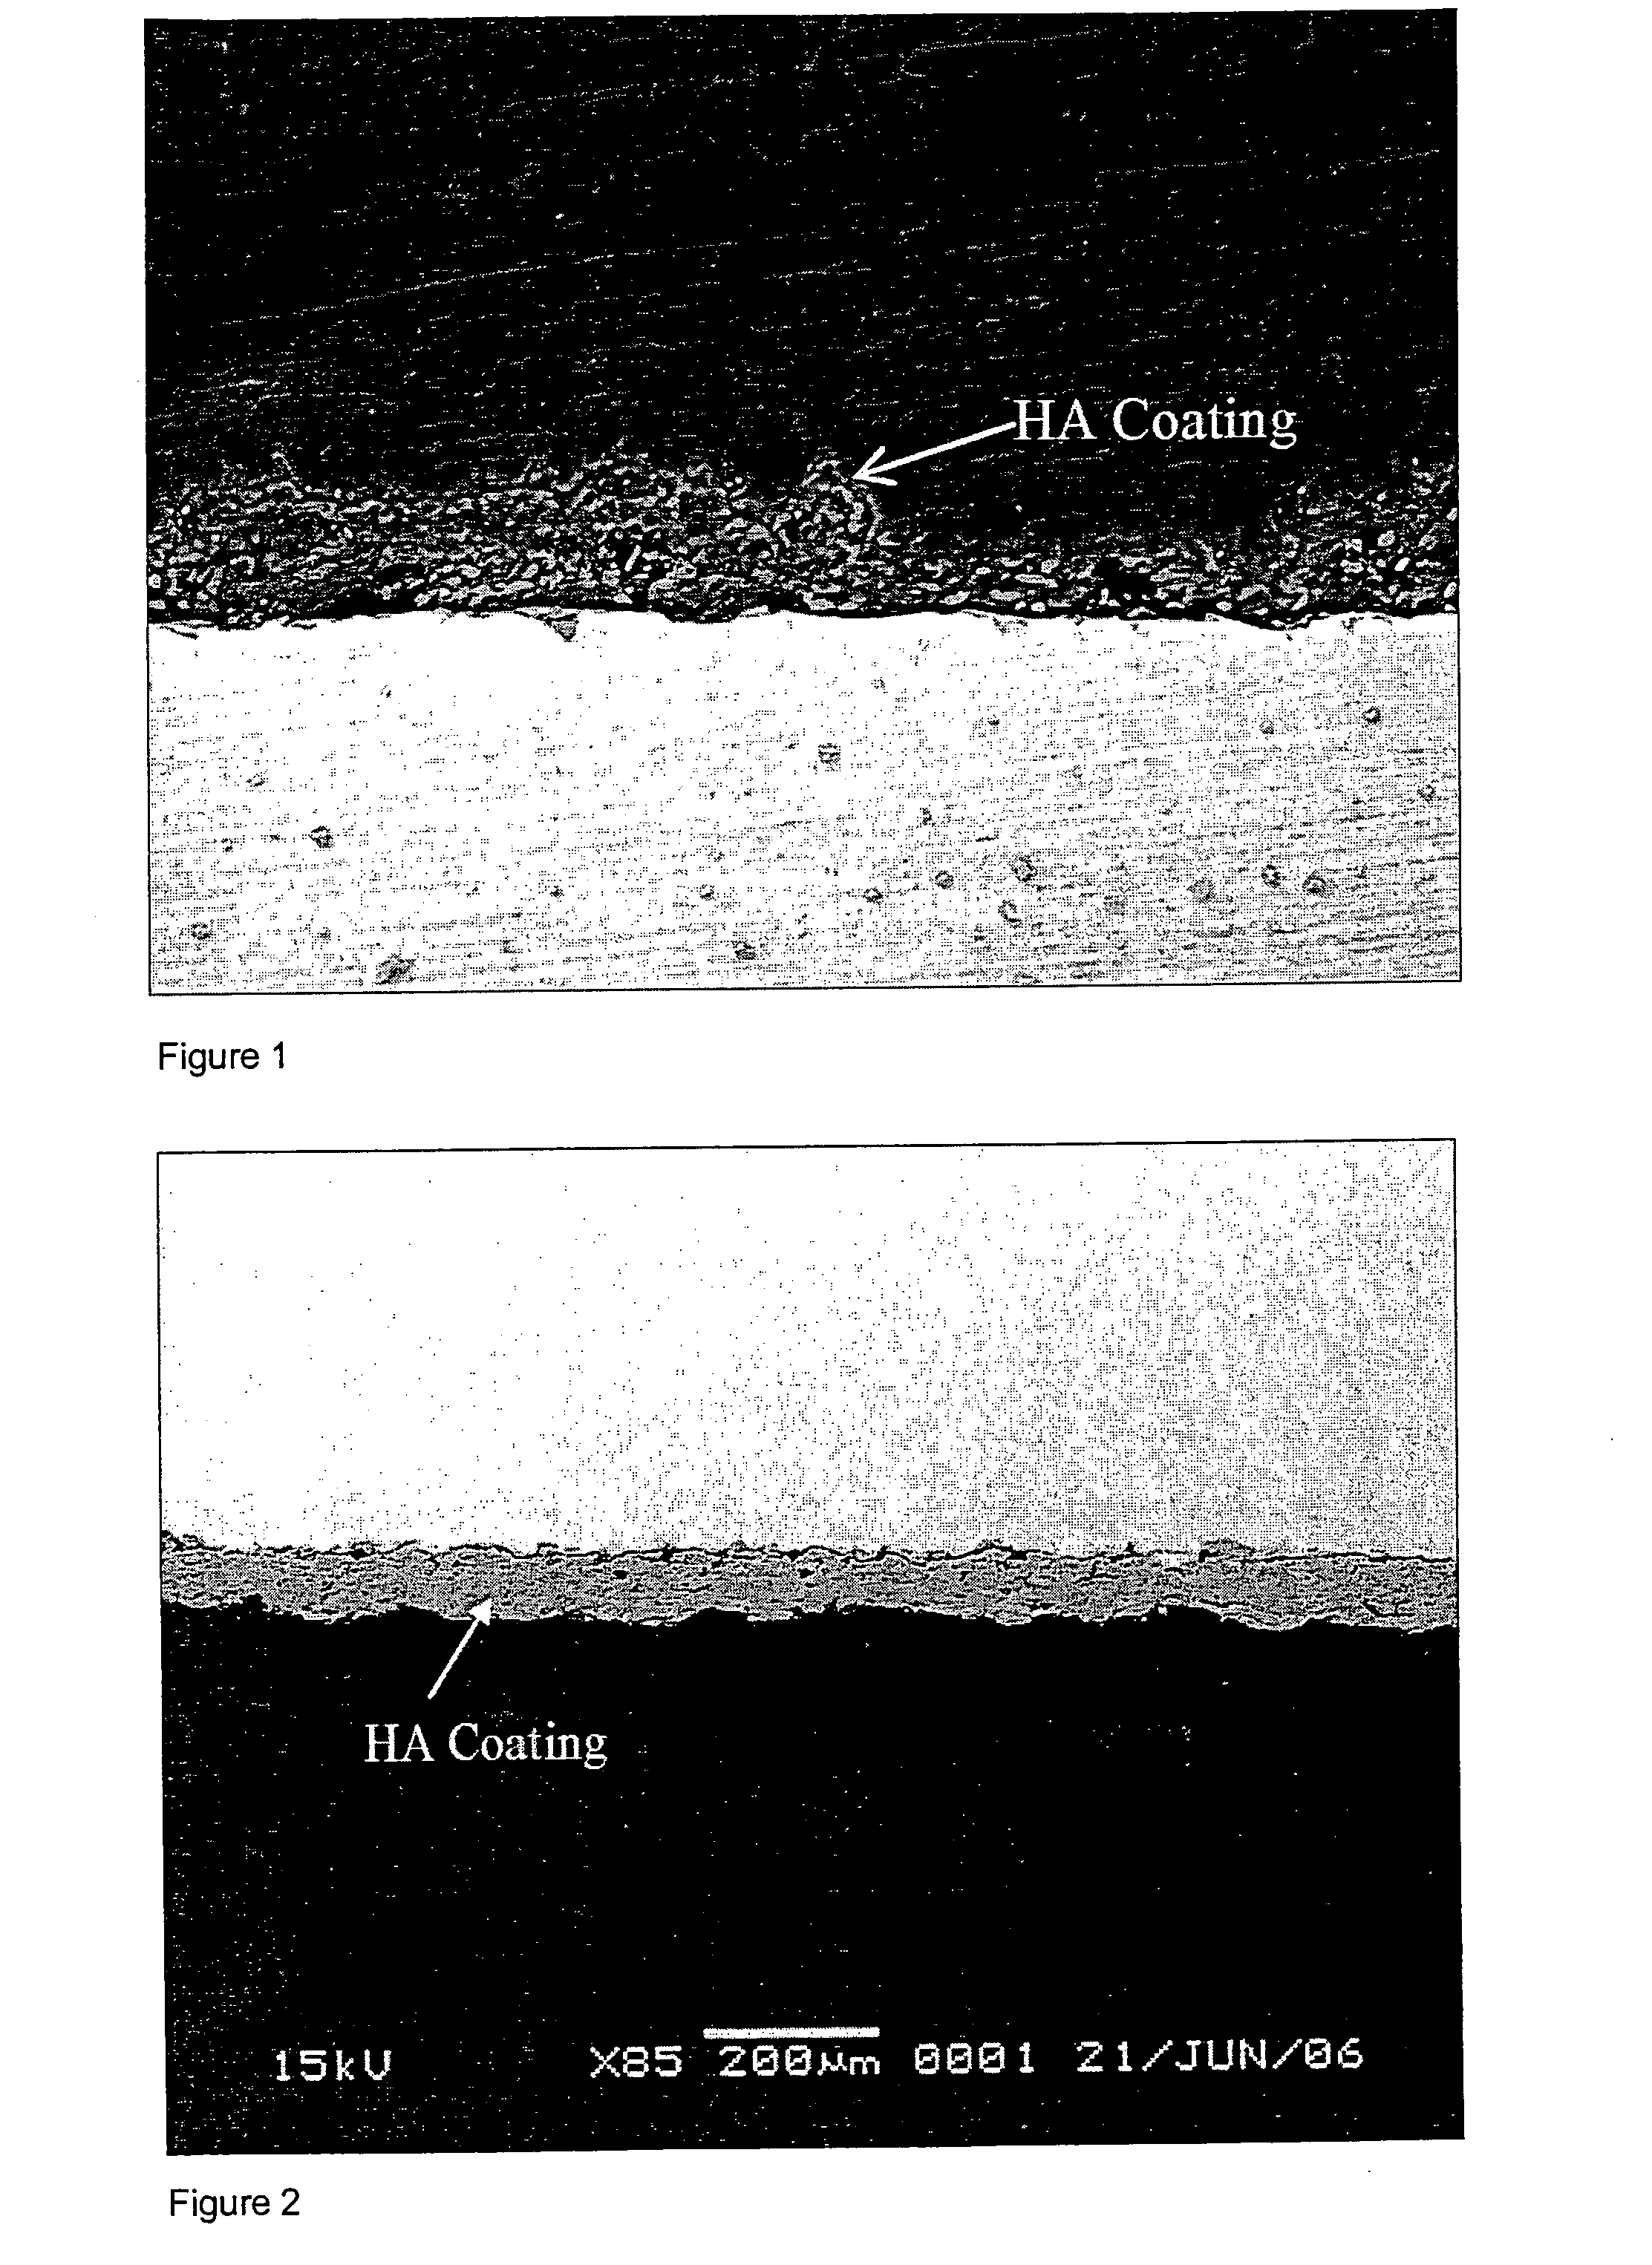 Article and a method of surface treatment of an article